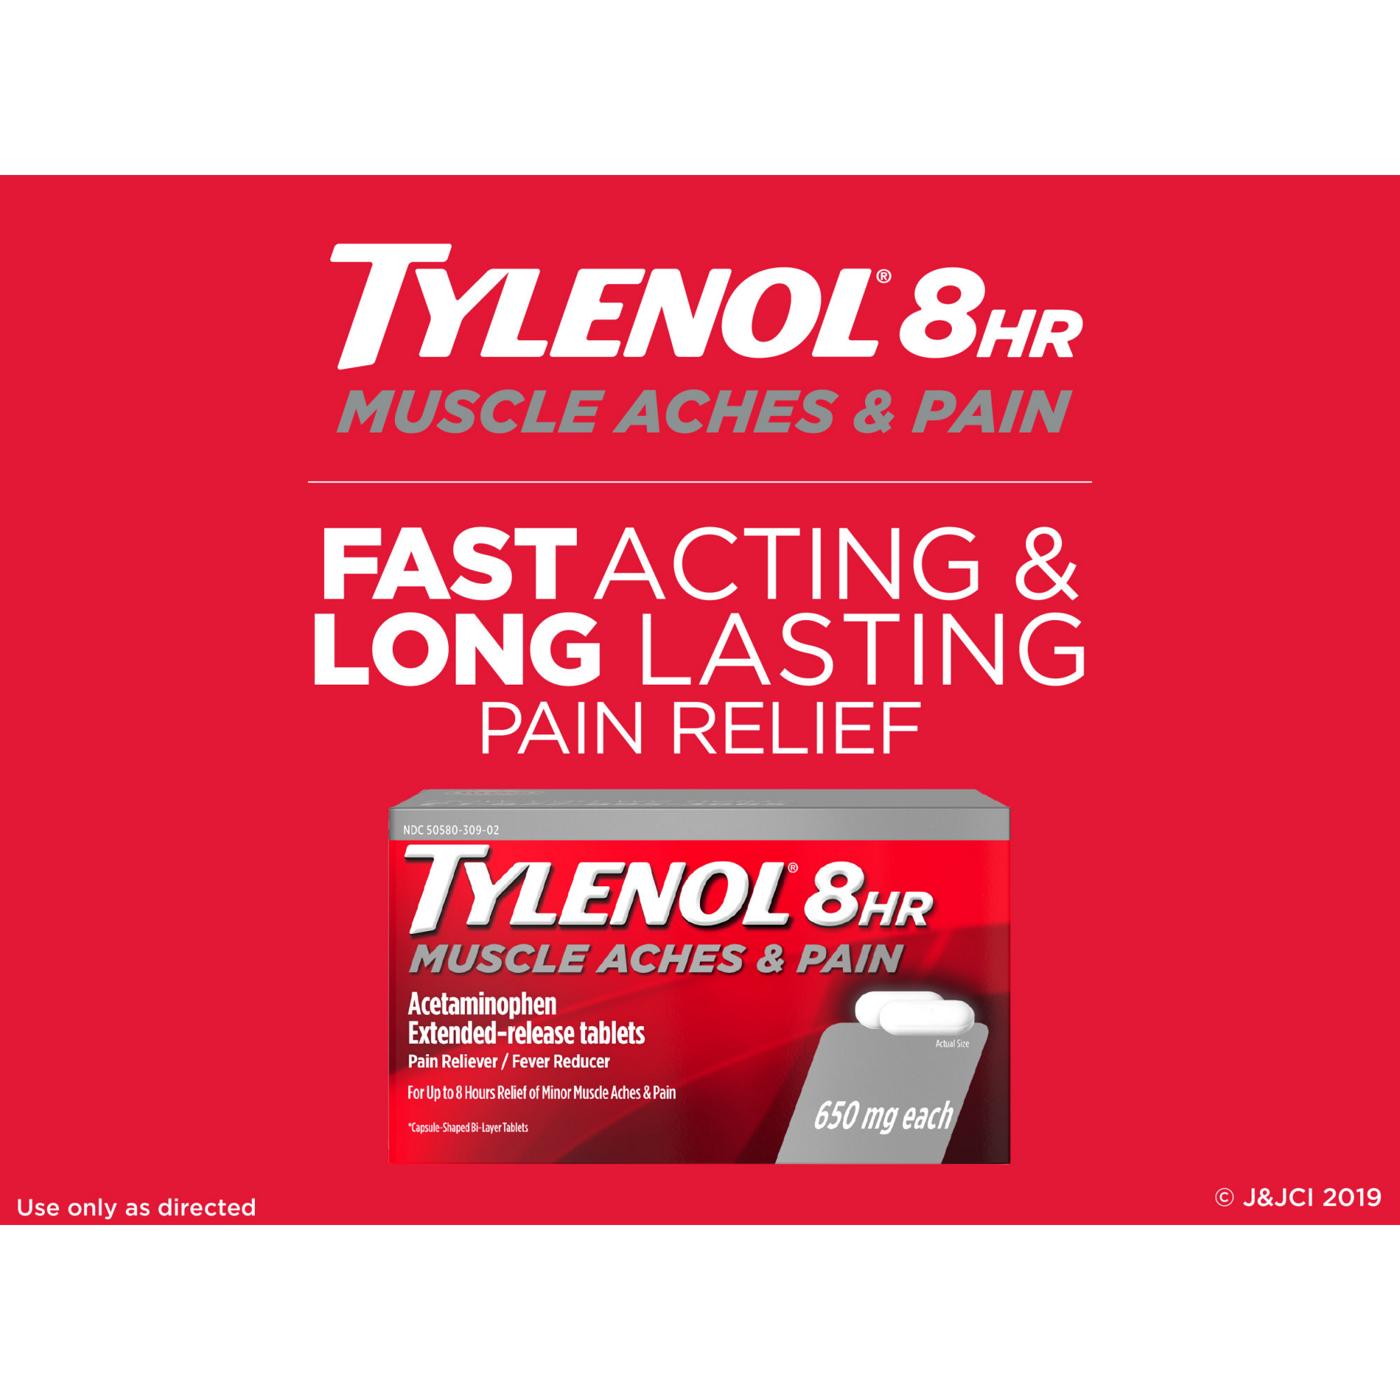 Tylenol 8 HR Muscle Aches & Pains; image 5 of 8